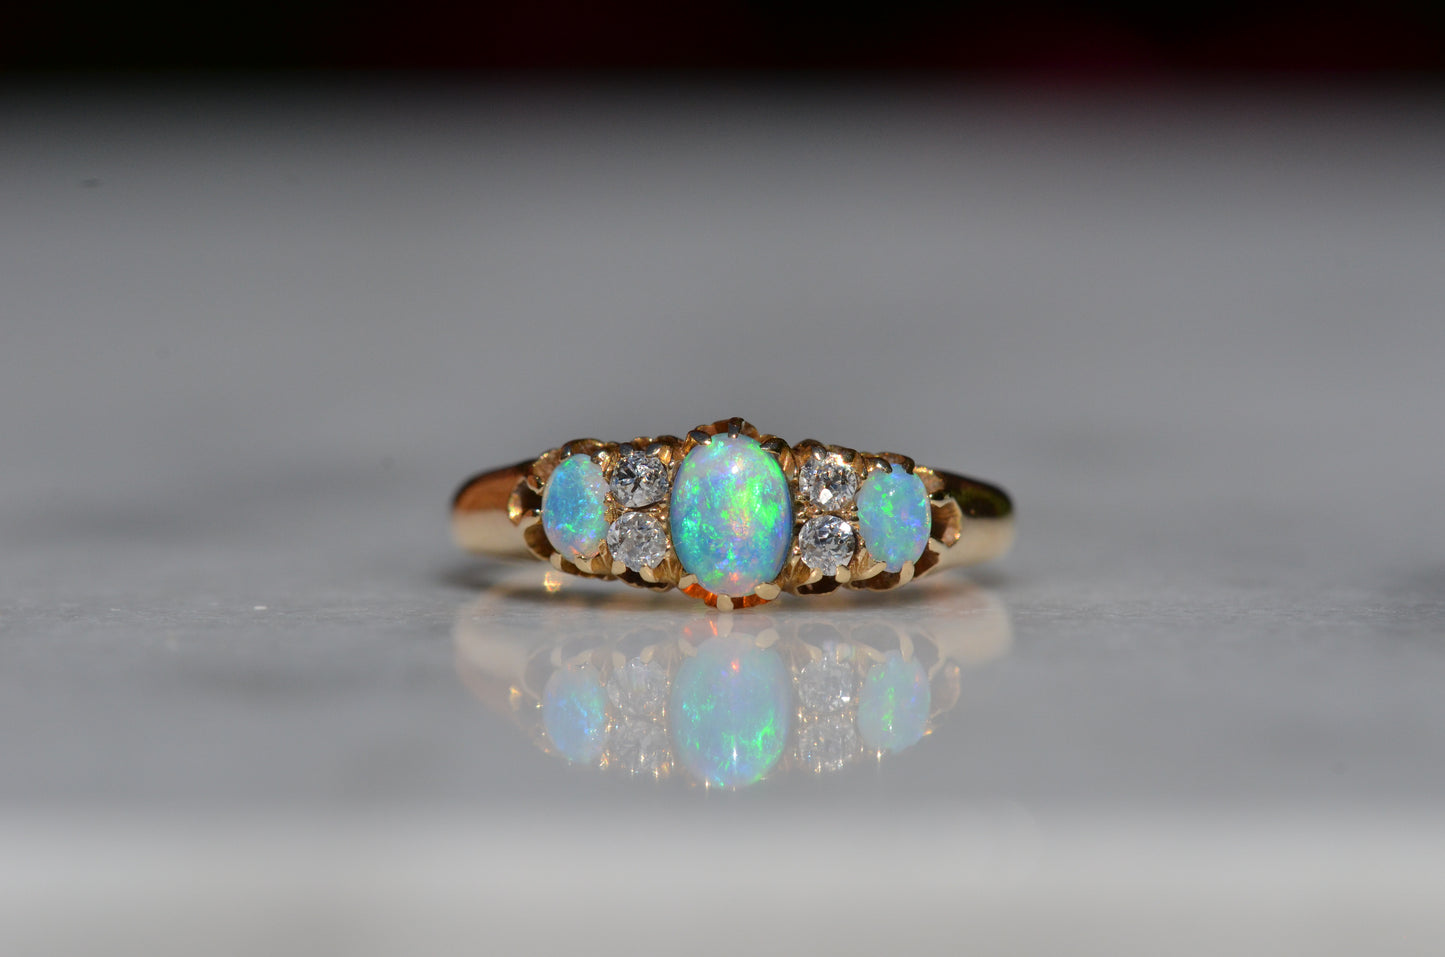 A closely-cropped macro of the Victorian ring, showcasing the strong green and blue play of color in the opals with a hint of violet and orange. The ring is photographed head-on.